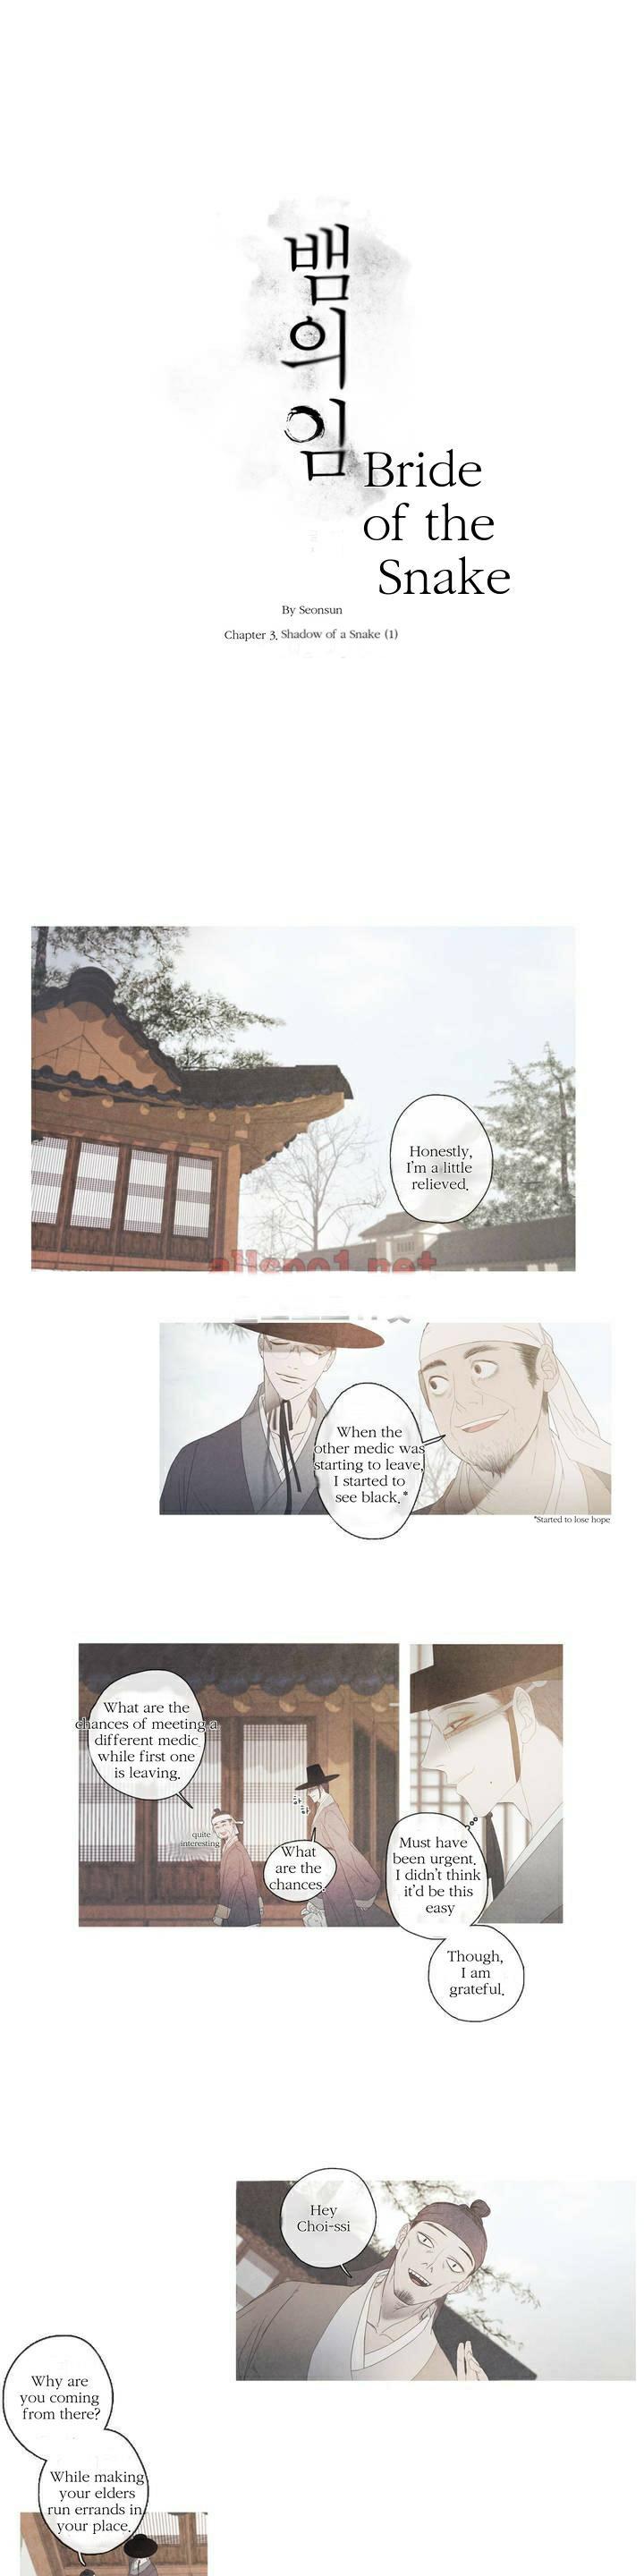 The Snake's Bride ch.3